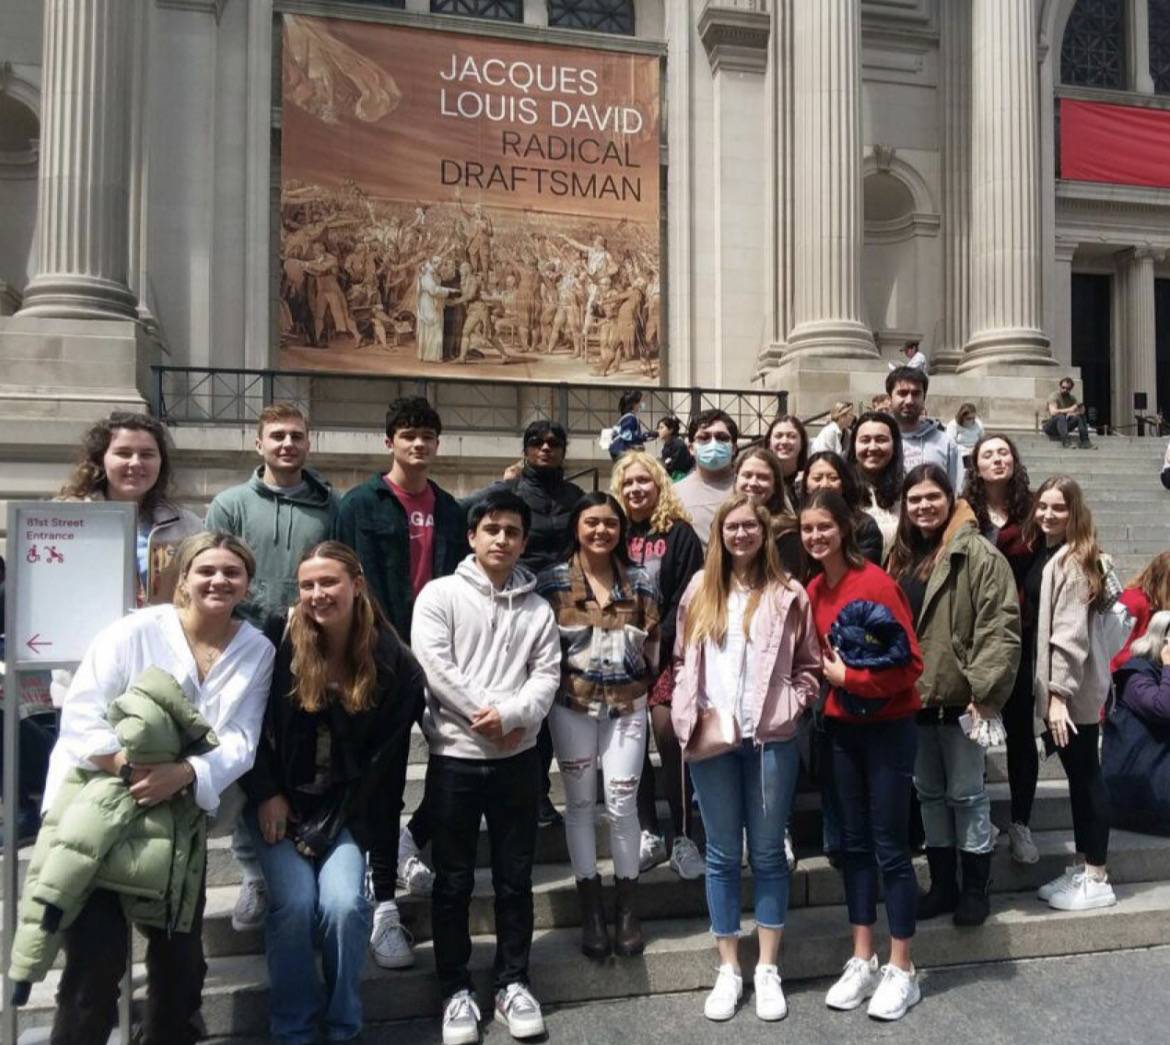 The Colgate French Club on their trip to the MET